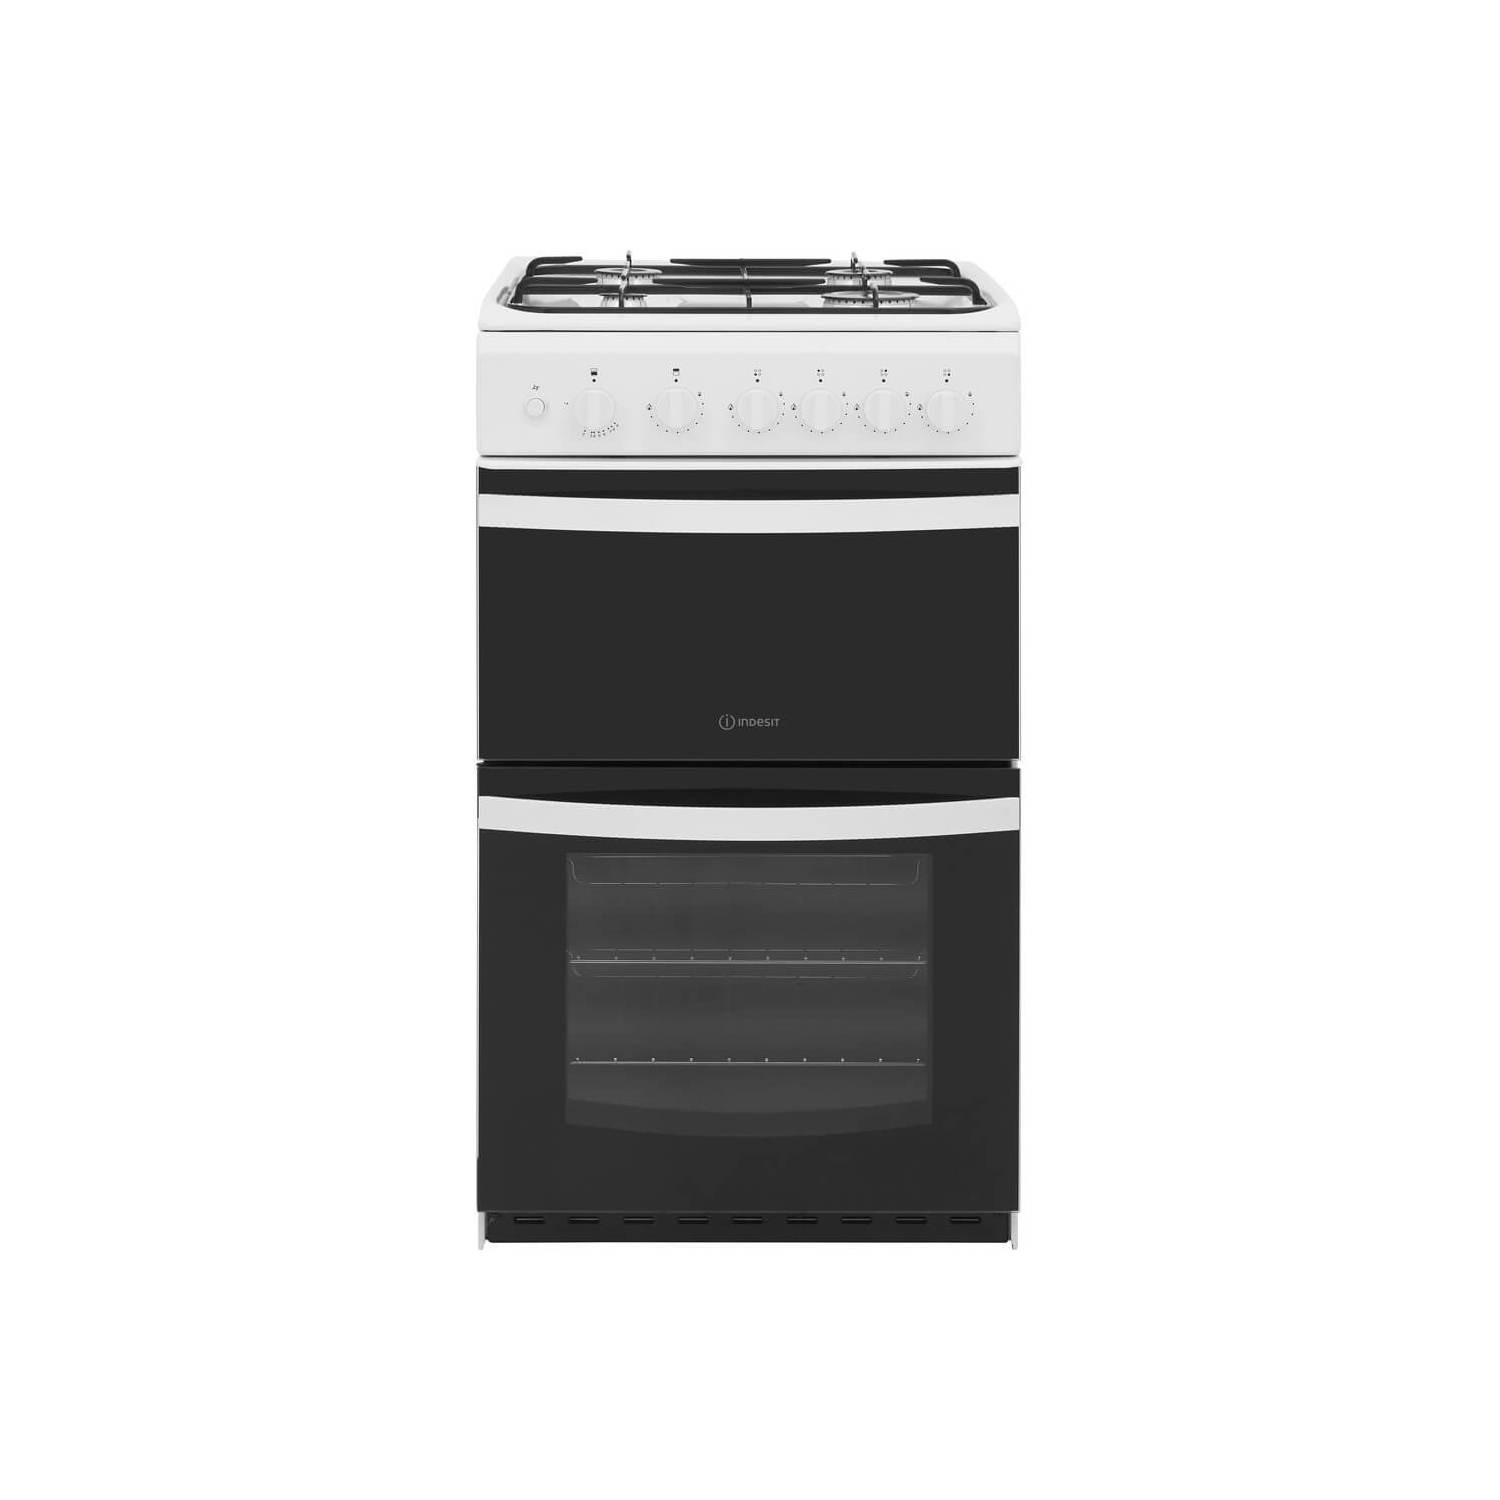 Indesit 50cm Double Cavity Gas Cooker with Catalytic Liners - White